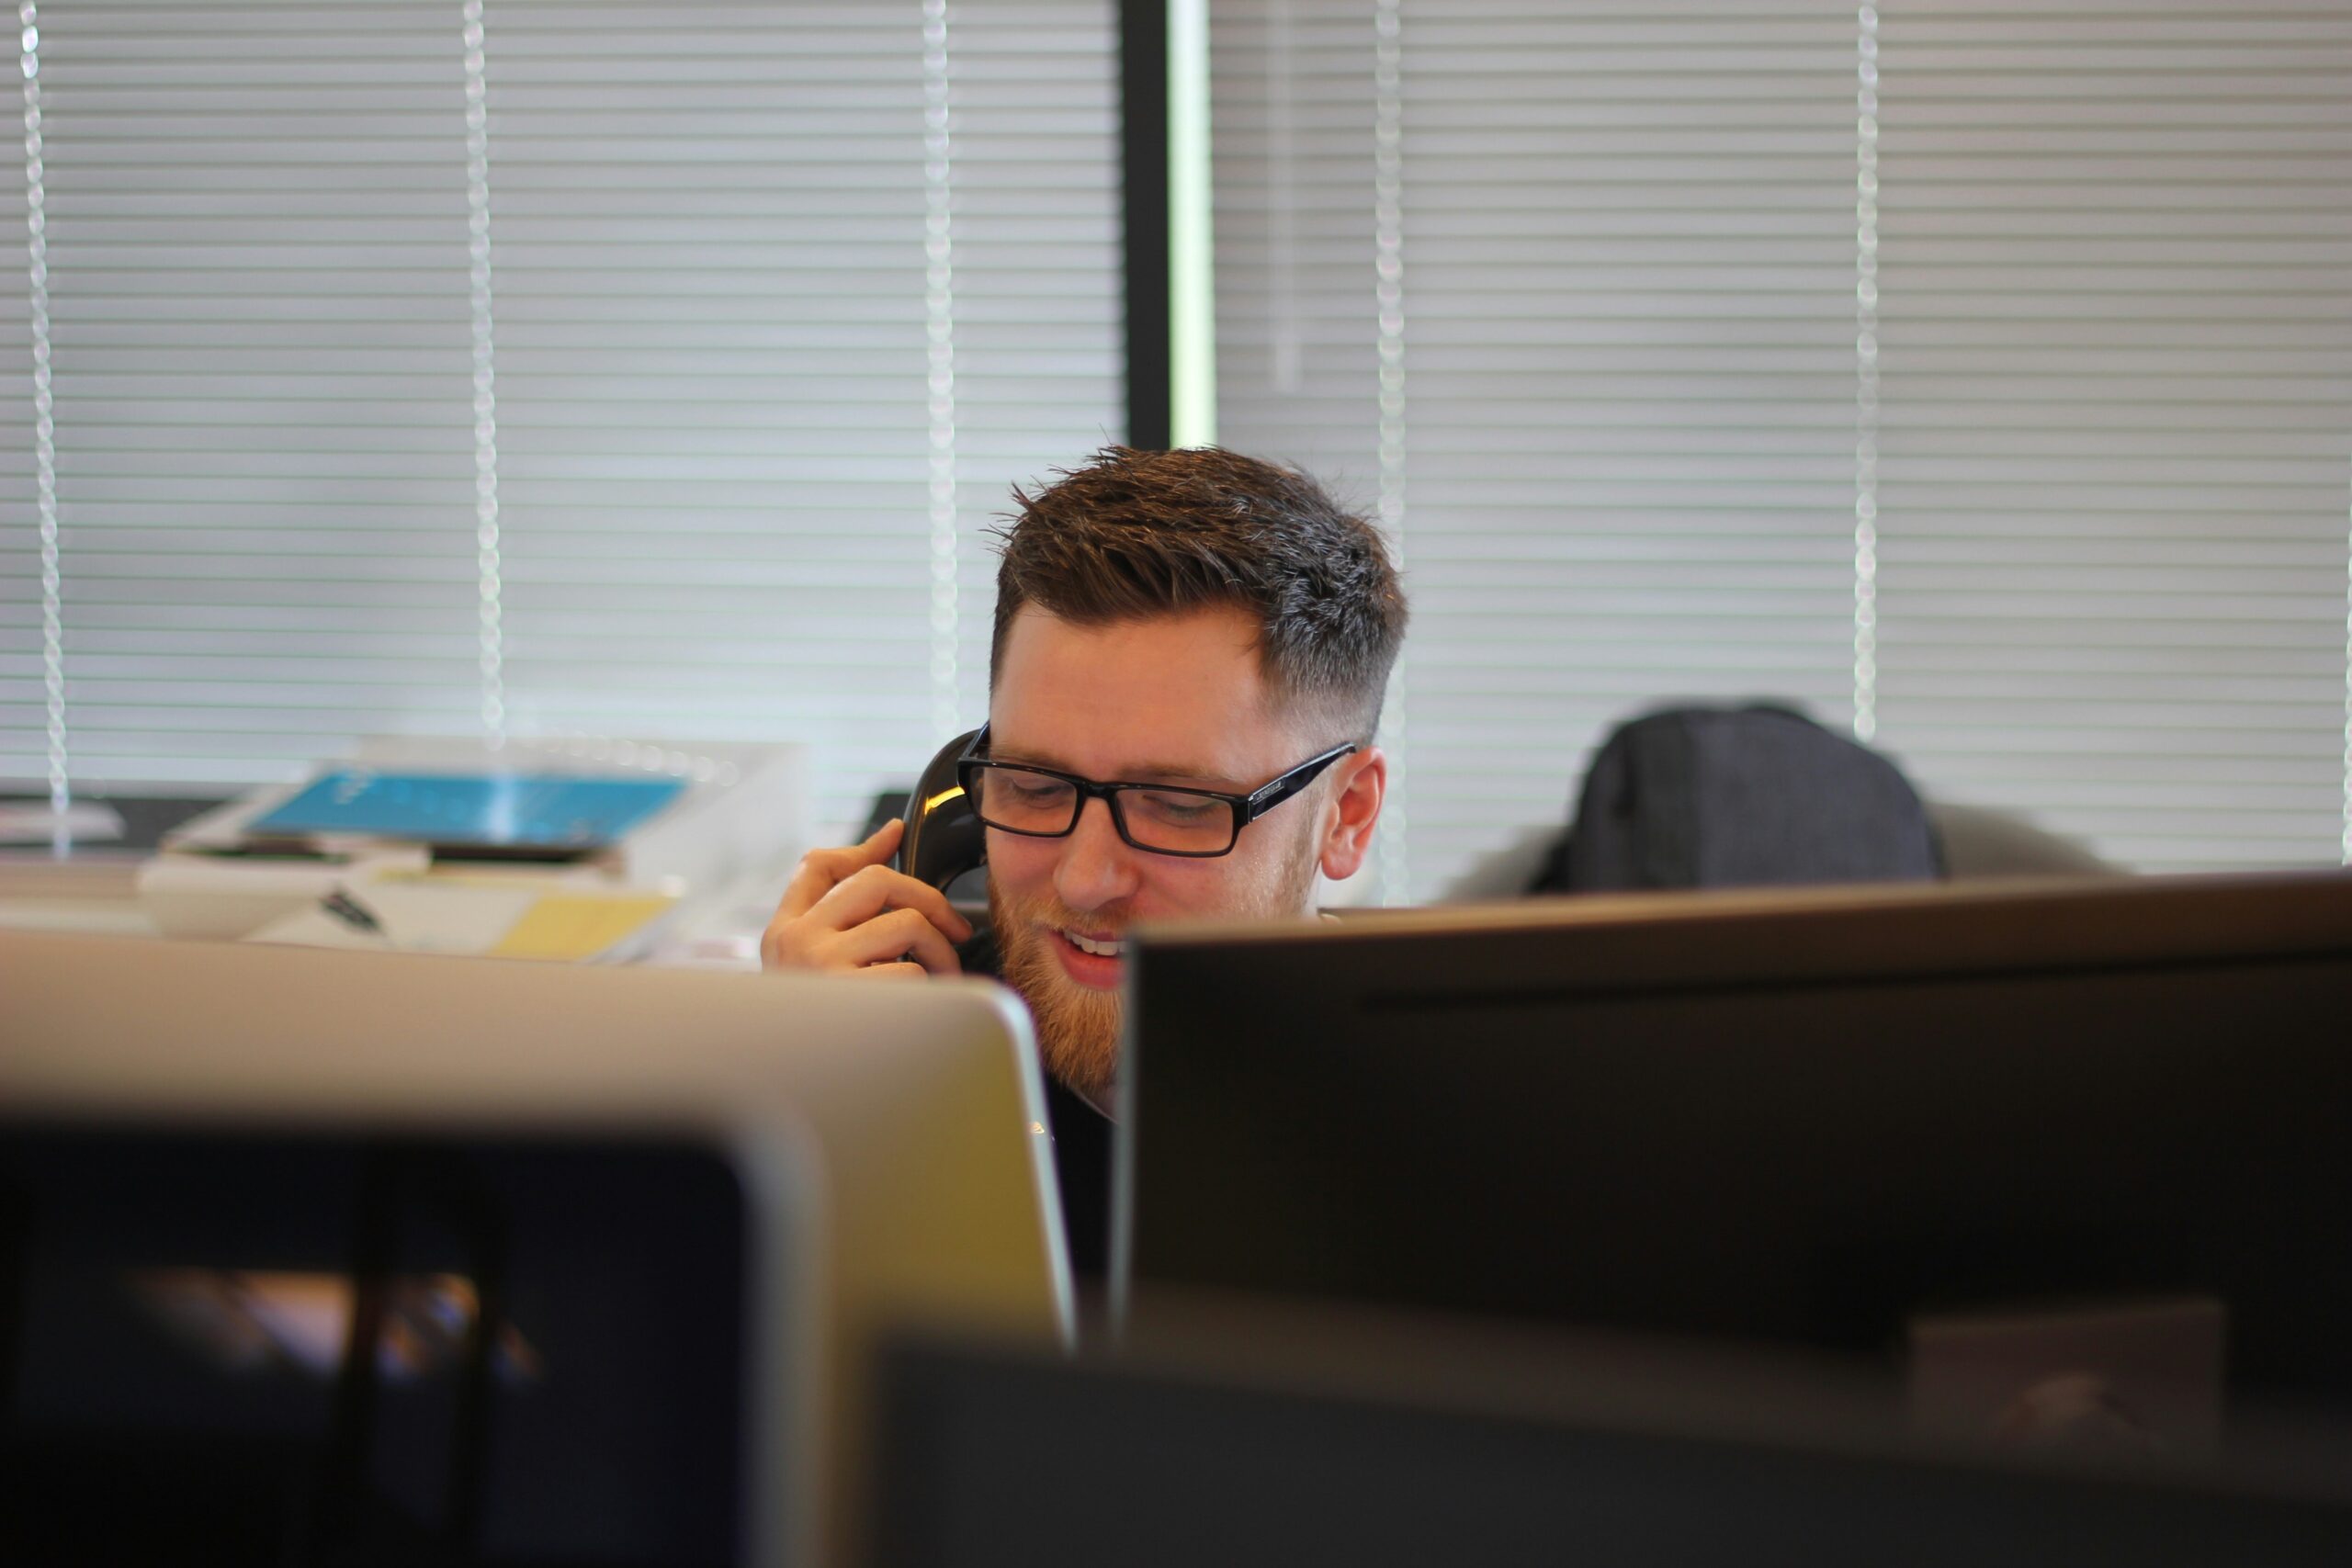 Man with glasses providing support on the phone to business that recognizes managed services benefits.